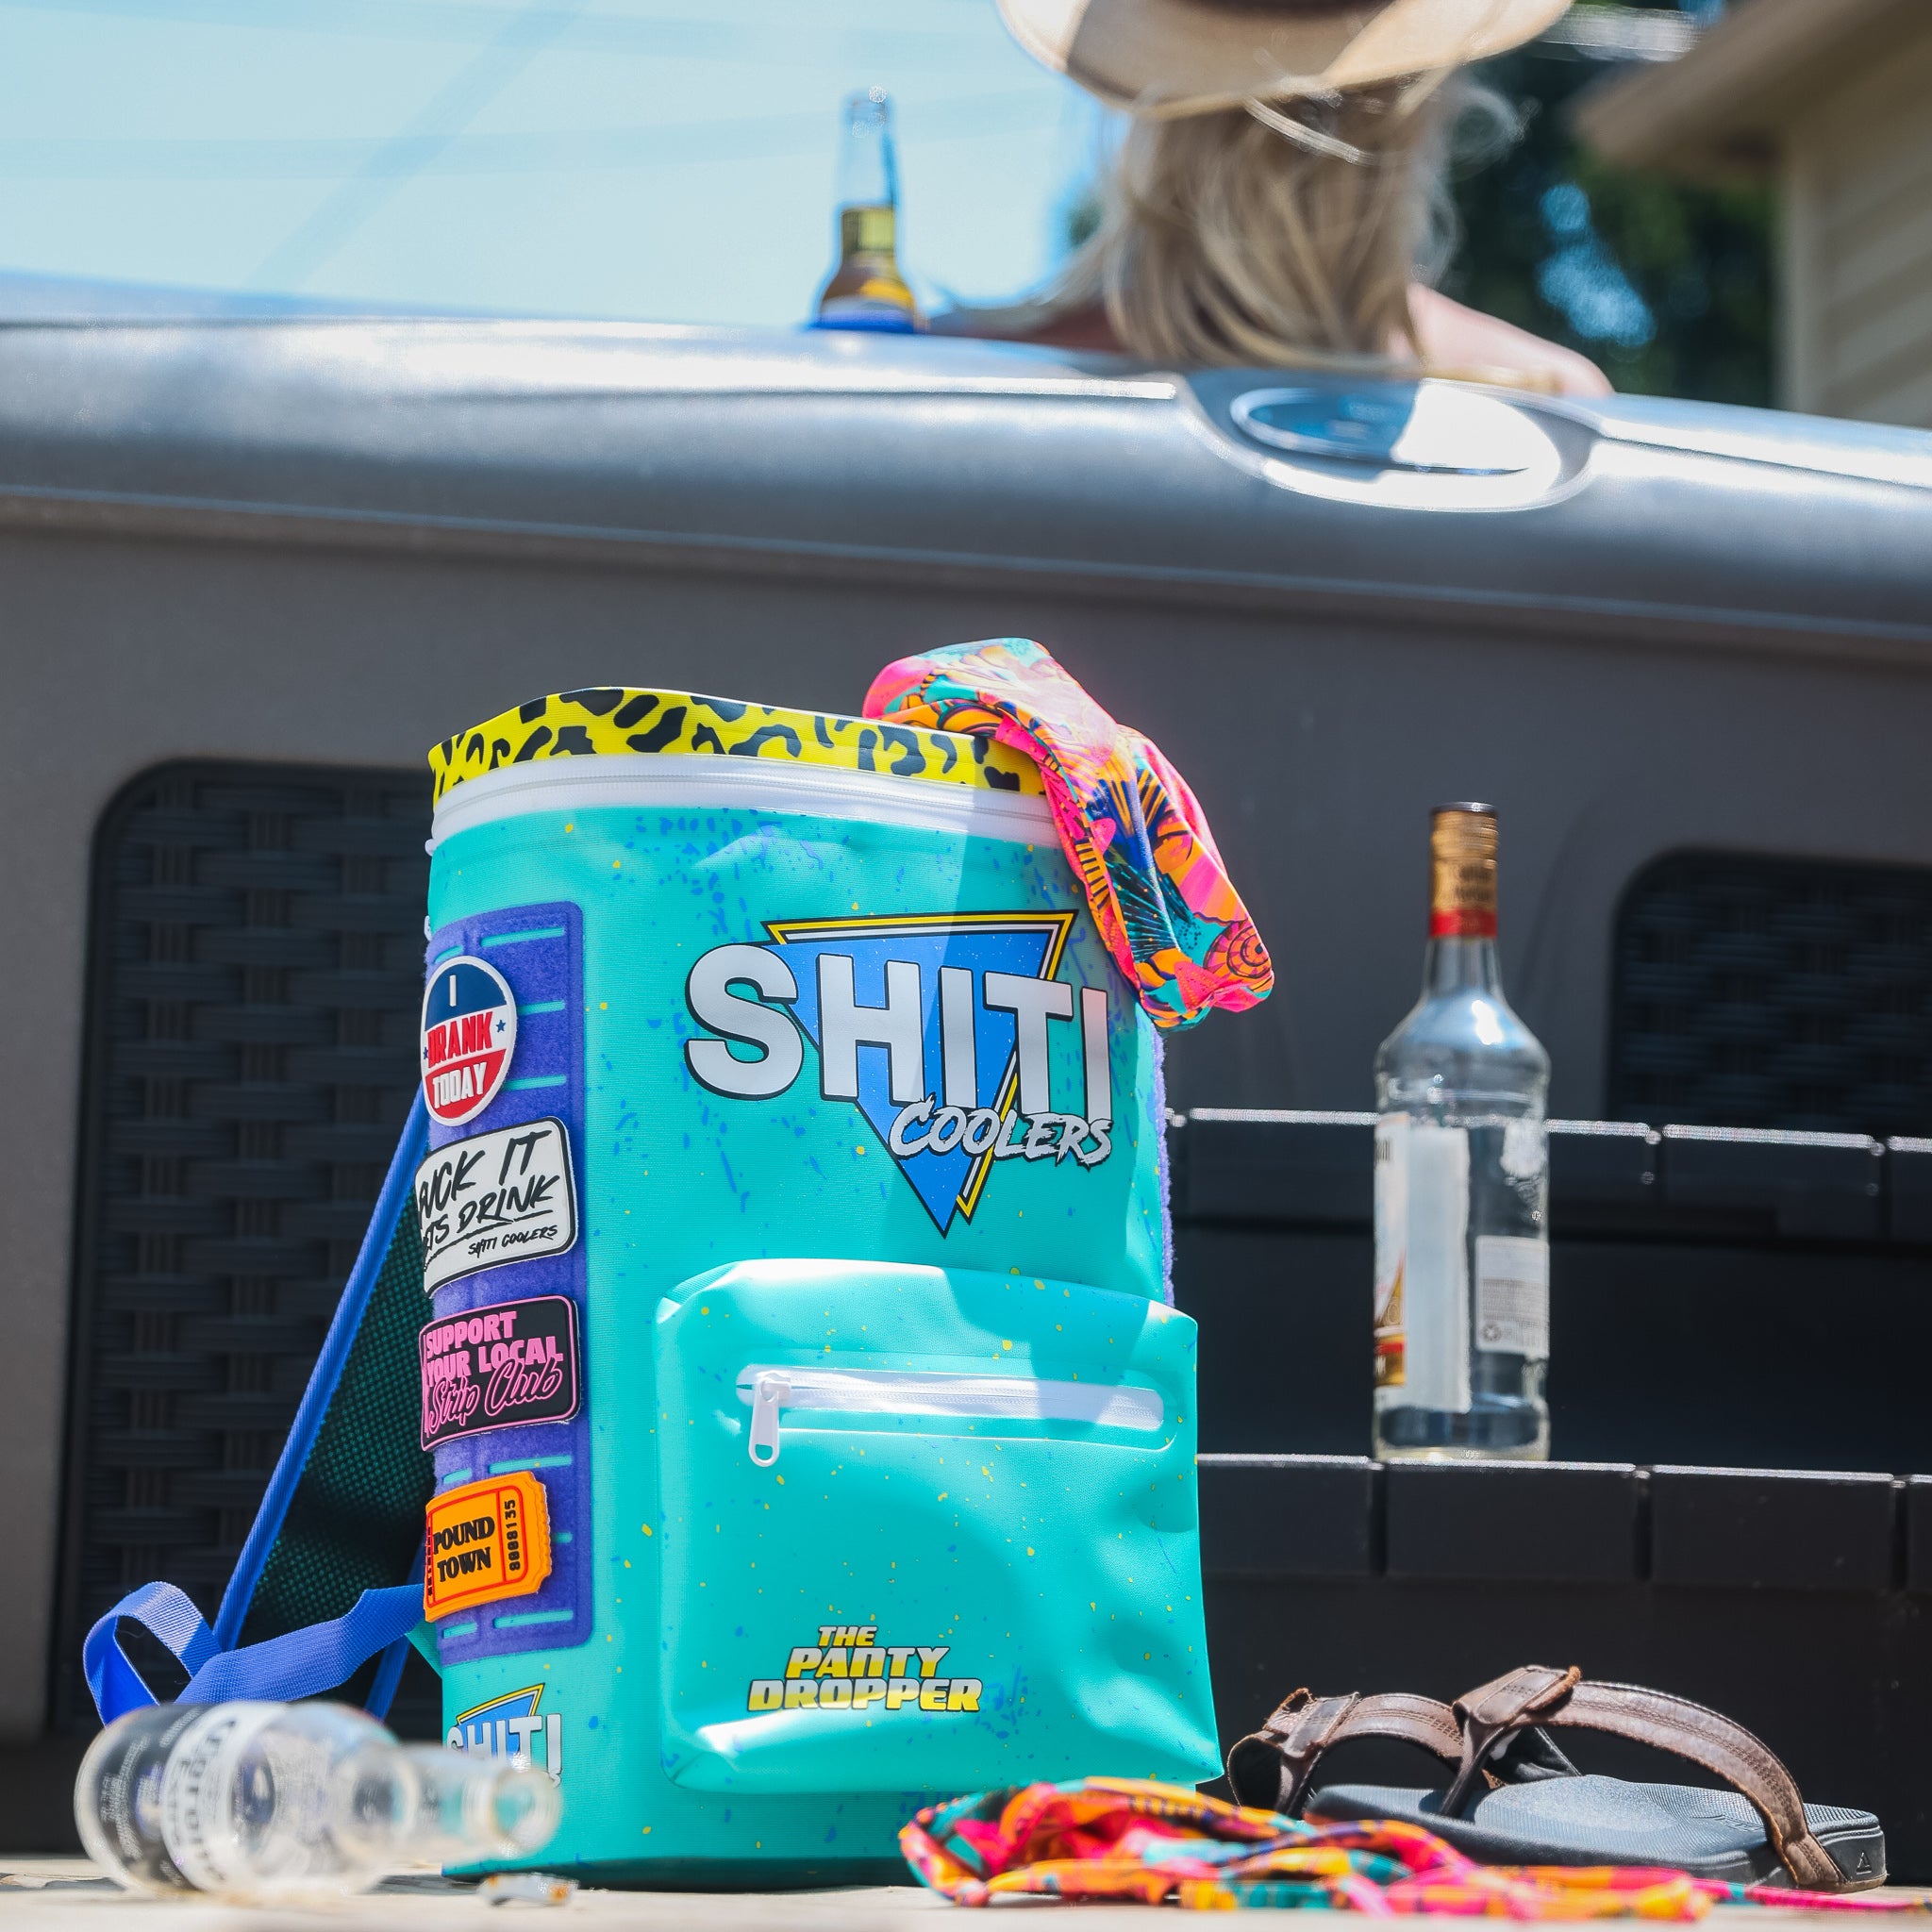 SHITI Coolers - The Official SHITI Coolers Measuring Tape